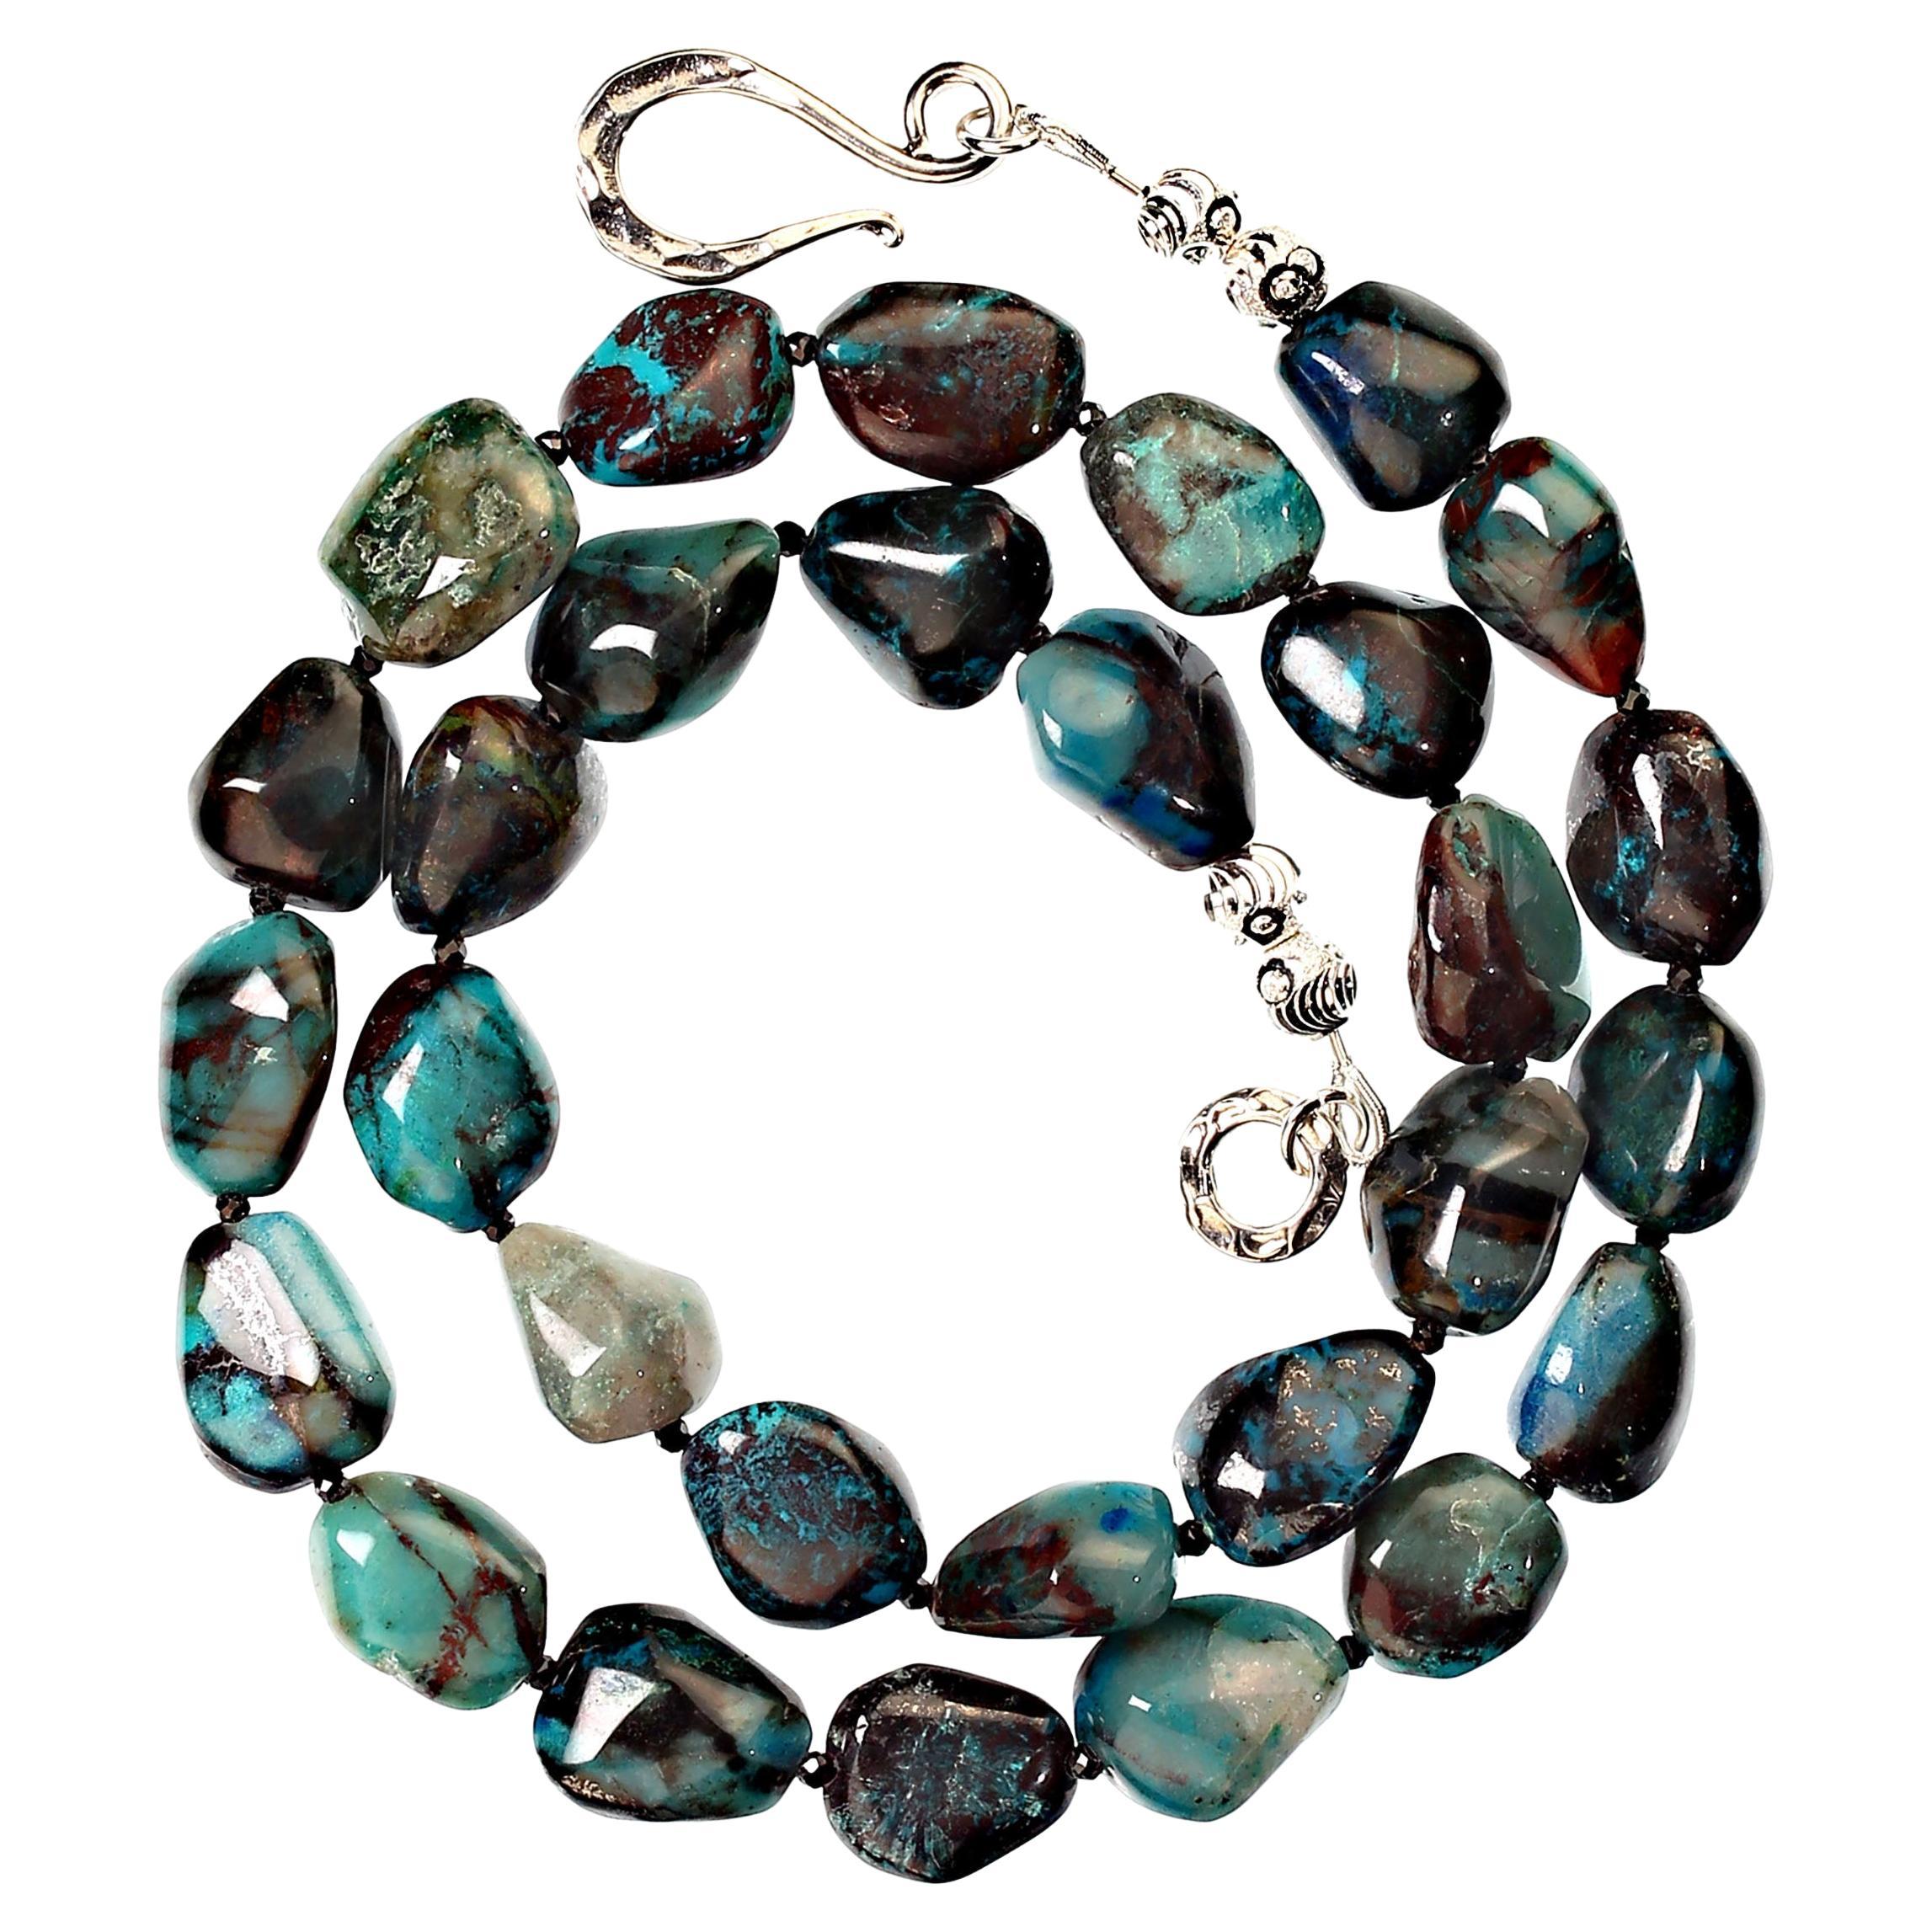 Stunning 20-inch necklace of highly polished African Azurite. This gorgeous Azurite exhibits various shades of blues and greens as well as the usual black, brown, and gray matrix. These are highly polished freeform nuggets gently graduated and